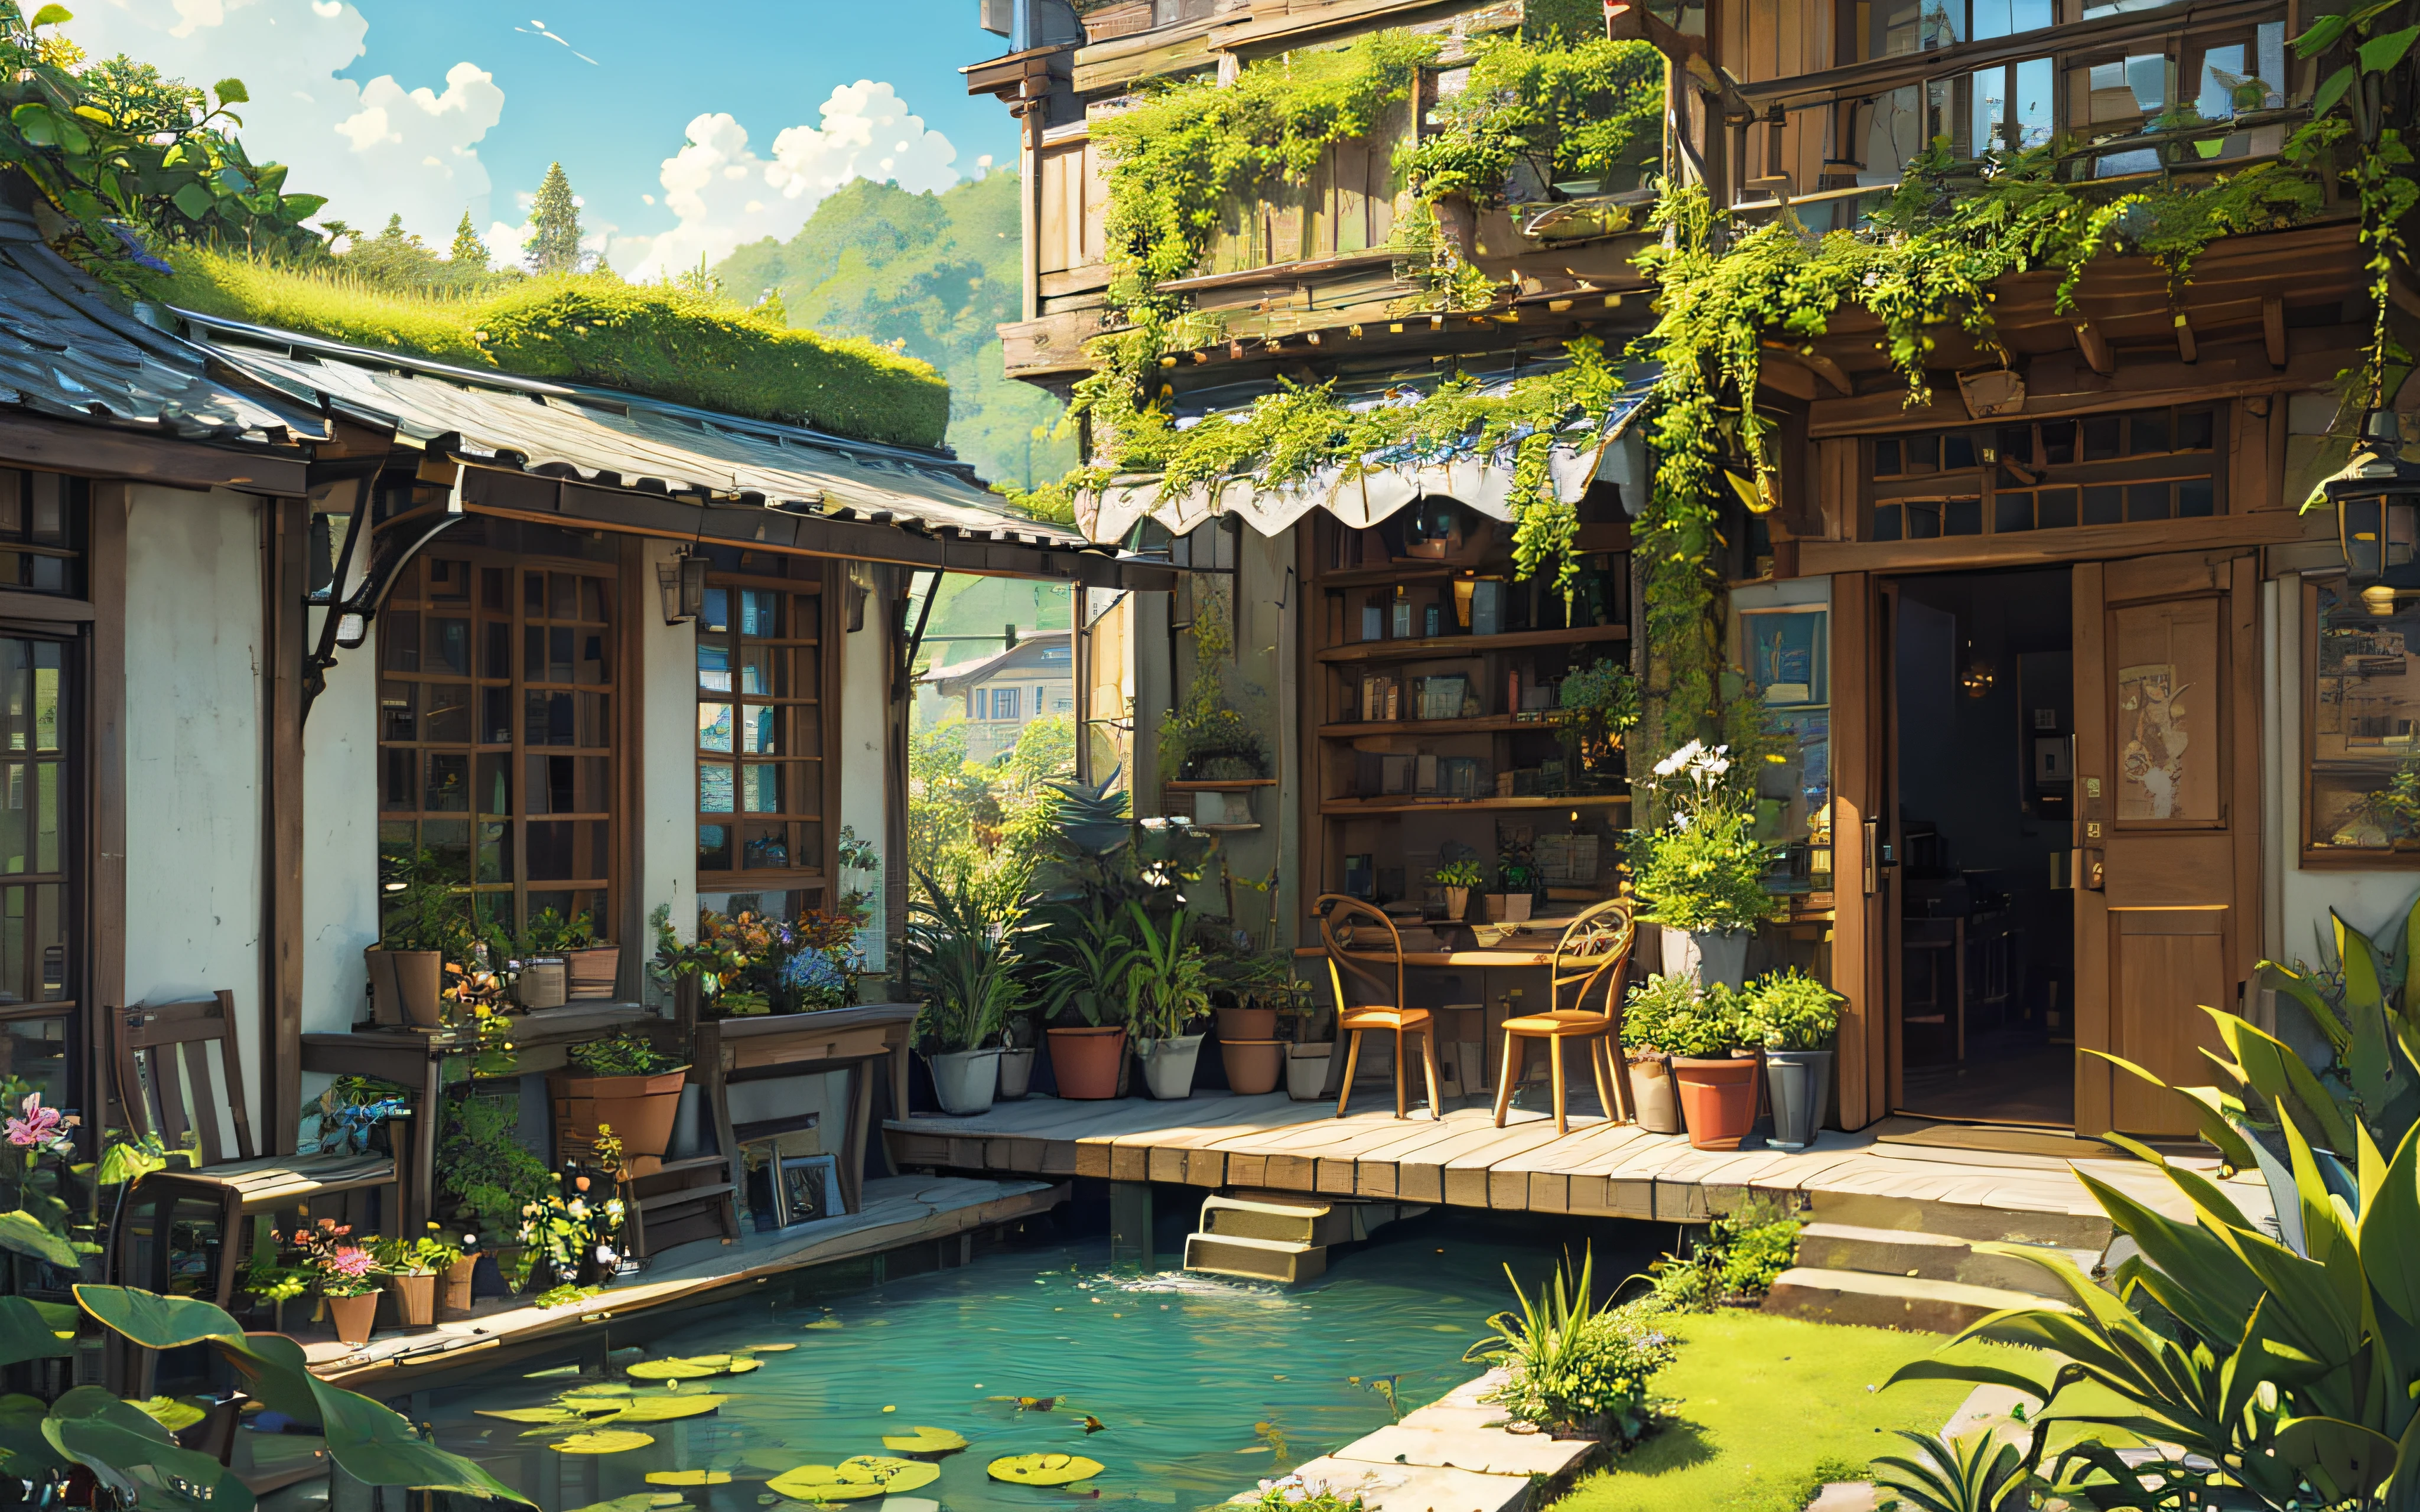 (micro-landscape:1.5),(best quality), ((masterpiece)), (highres), illustration, original, extremely detailed wallpaper, no humans, window, scenery, plant, water, potted plant, outdoors, building, door, house, flower pot, day, lily pad, chair, flower, table, stairs, watermark, hat, tree, sunlight, pond, grass, indoors, reflection, lamp, balcony, black headwear, bush, sky, railing, desk, open window, shelf, leaf, book, web address, copyright name, ladder, architecture, shadow, solo, dated, vines, vase, city, cafe, lantern, bucket, ruins, bench, shop, signature, moss, boat, barrel, river,